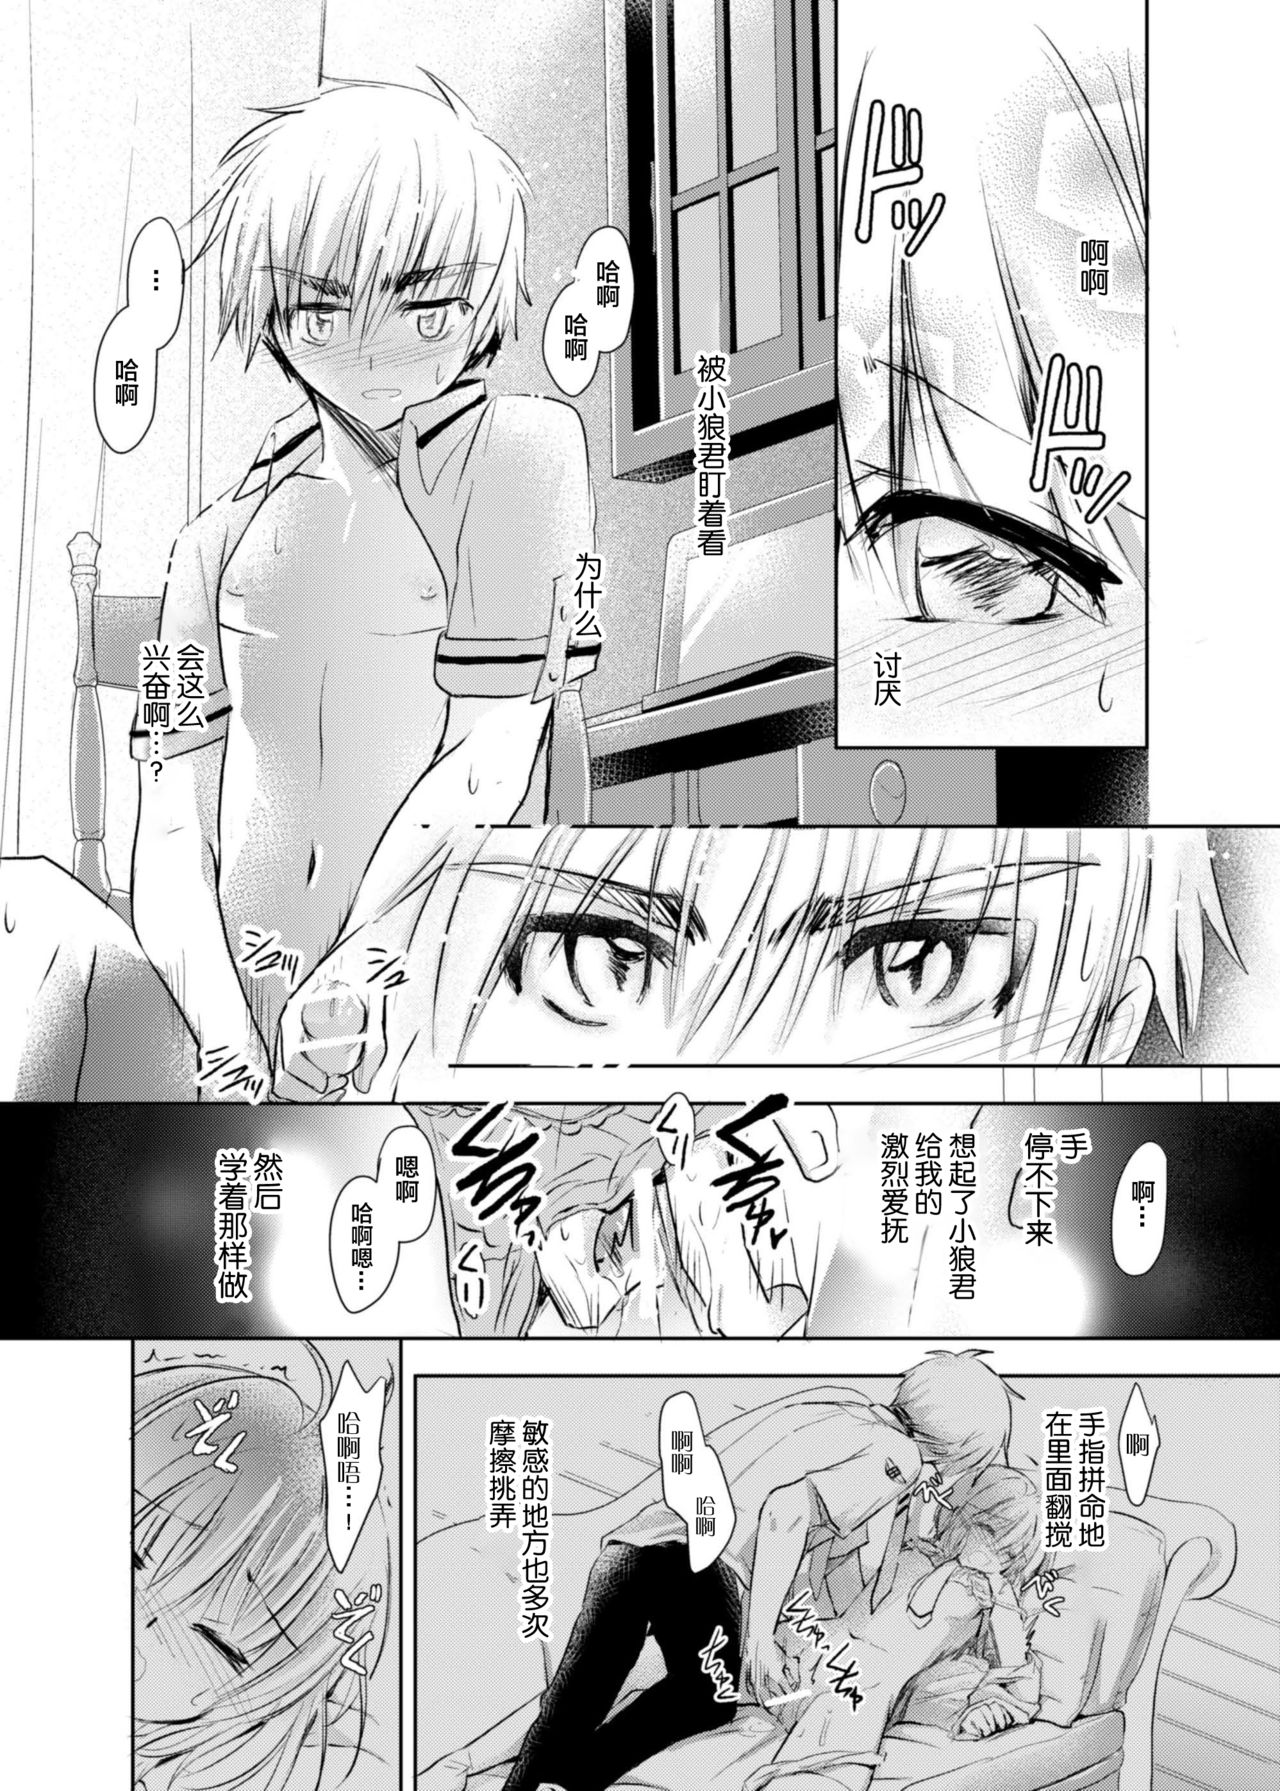 [Maple of Forest (Kaede Sago)] Give and Take (Cardcaptor Sakura) [Chinese] [新桥月白日语社] [Digital] page 21 full